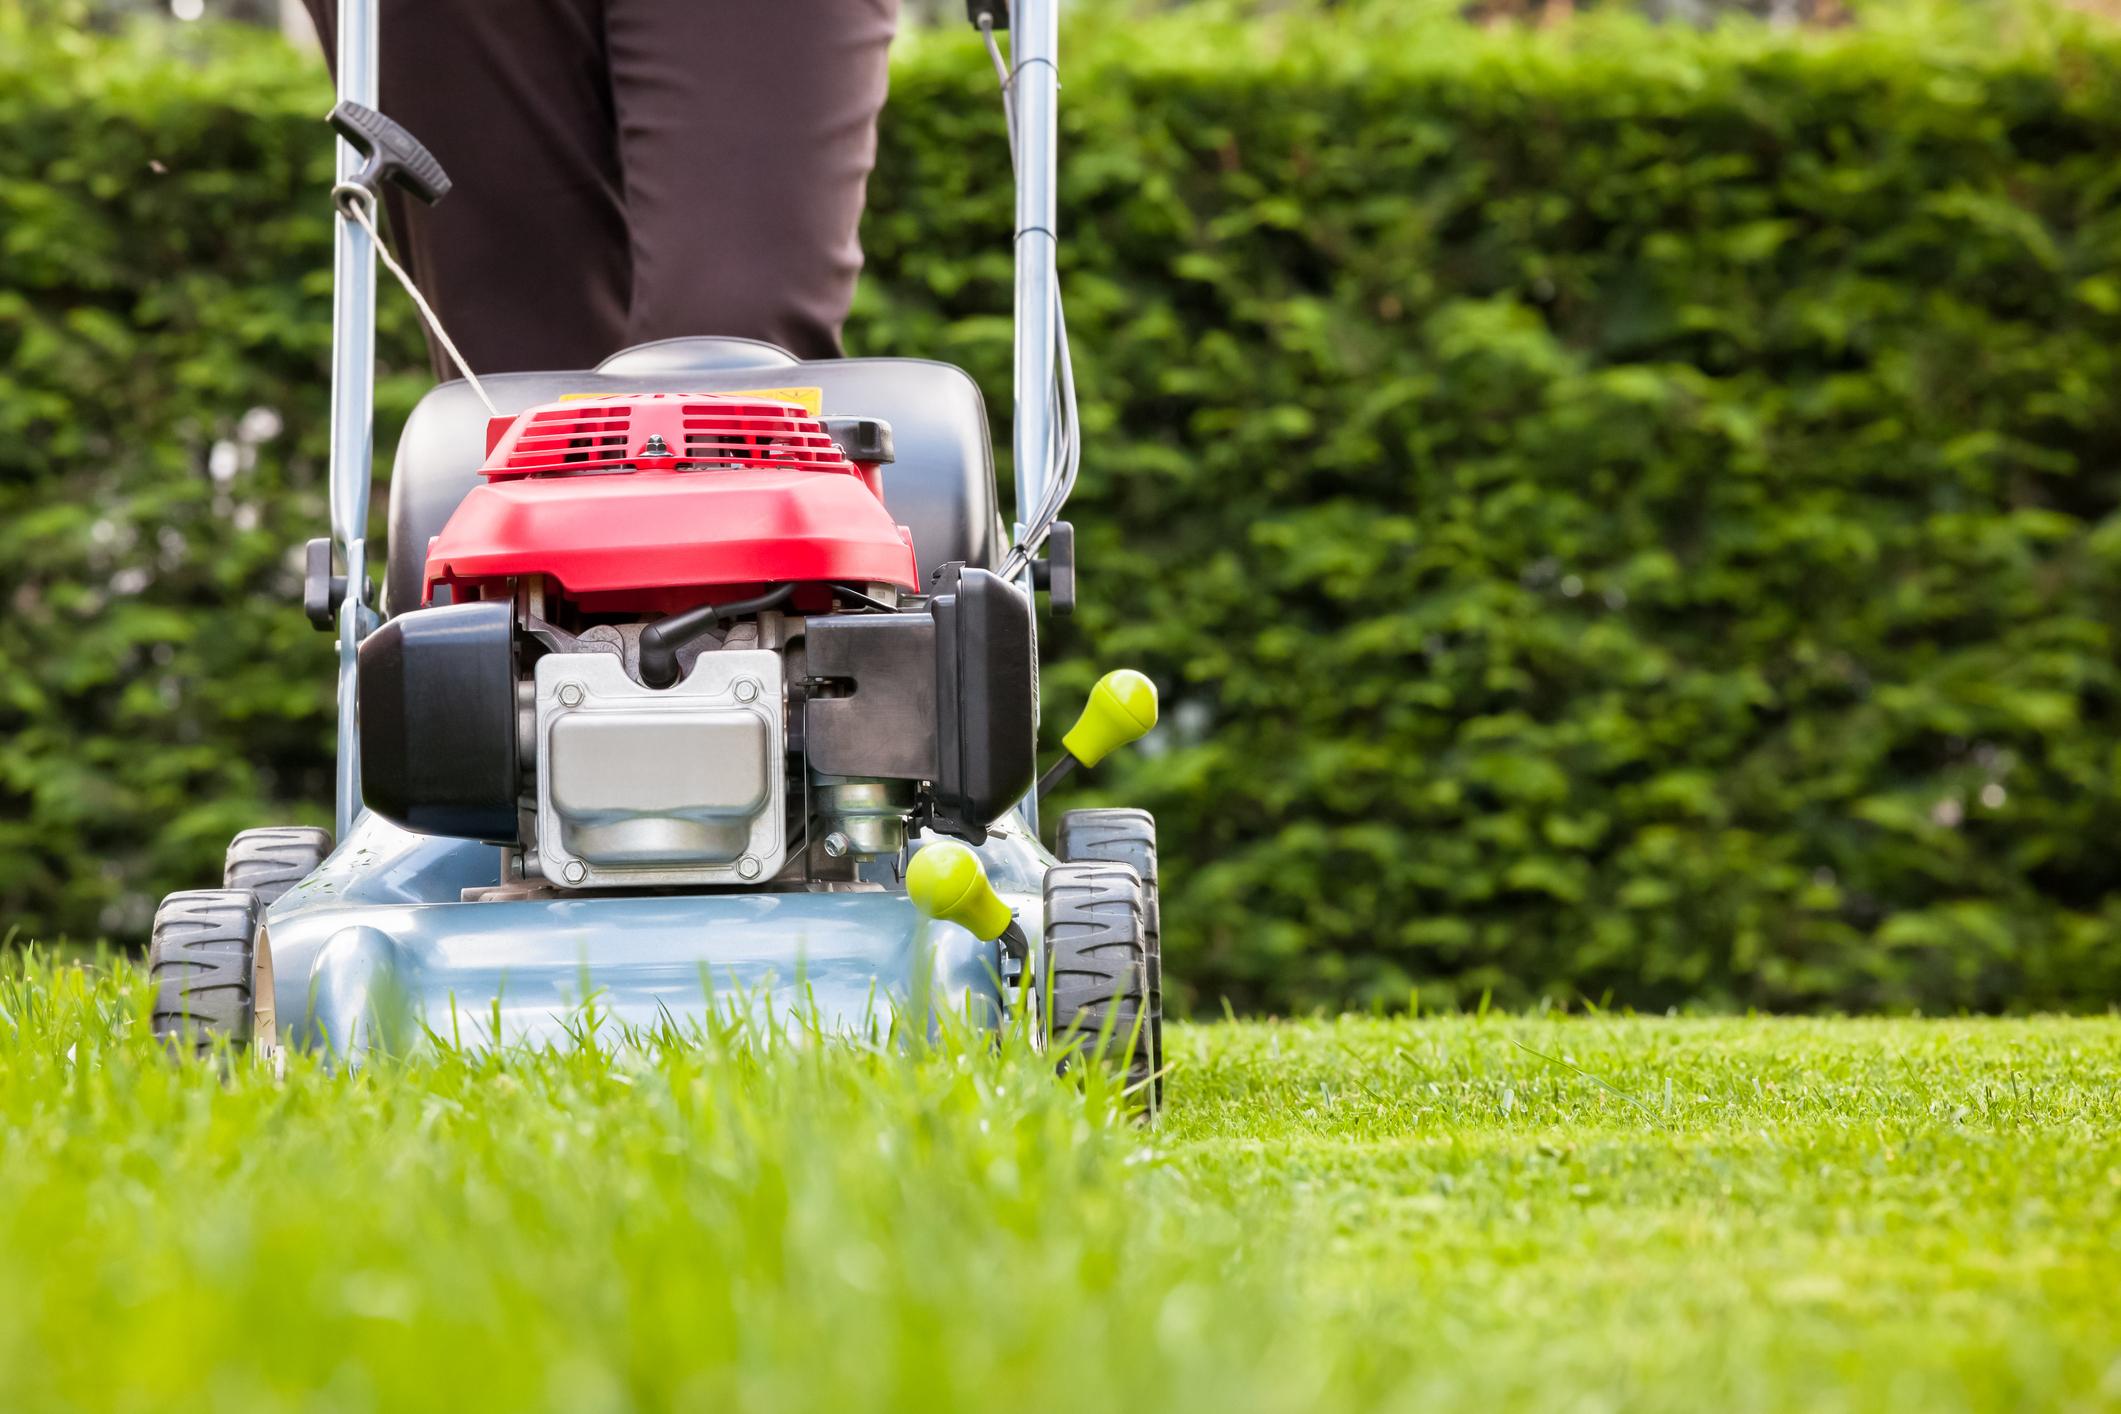 Mowing the grass (iStock - stoncelli)